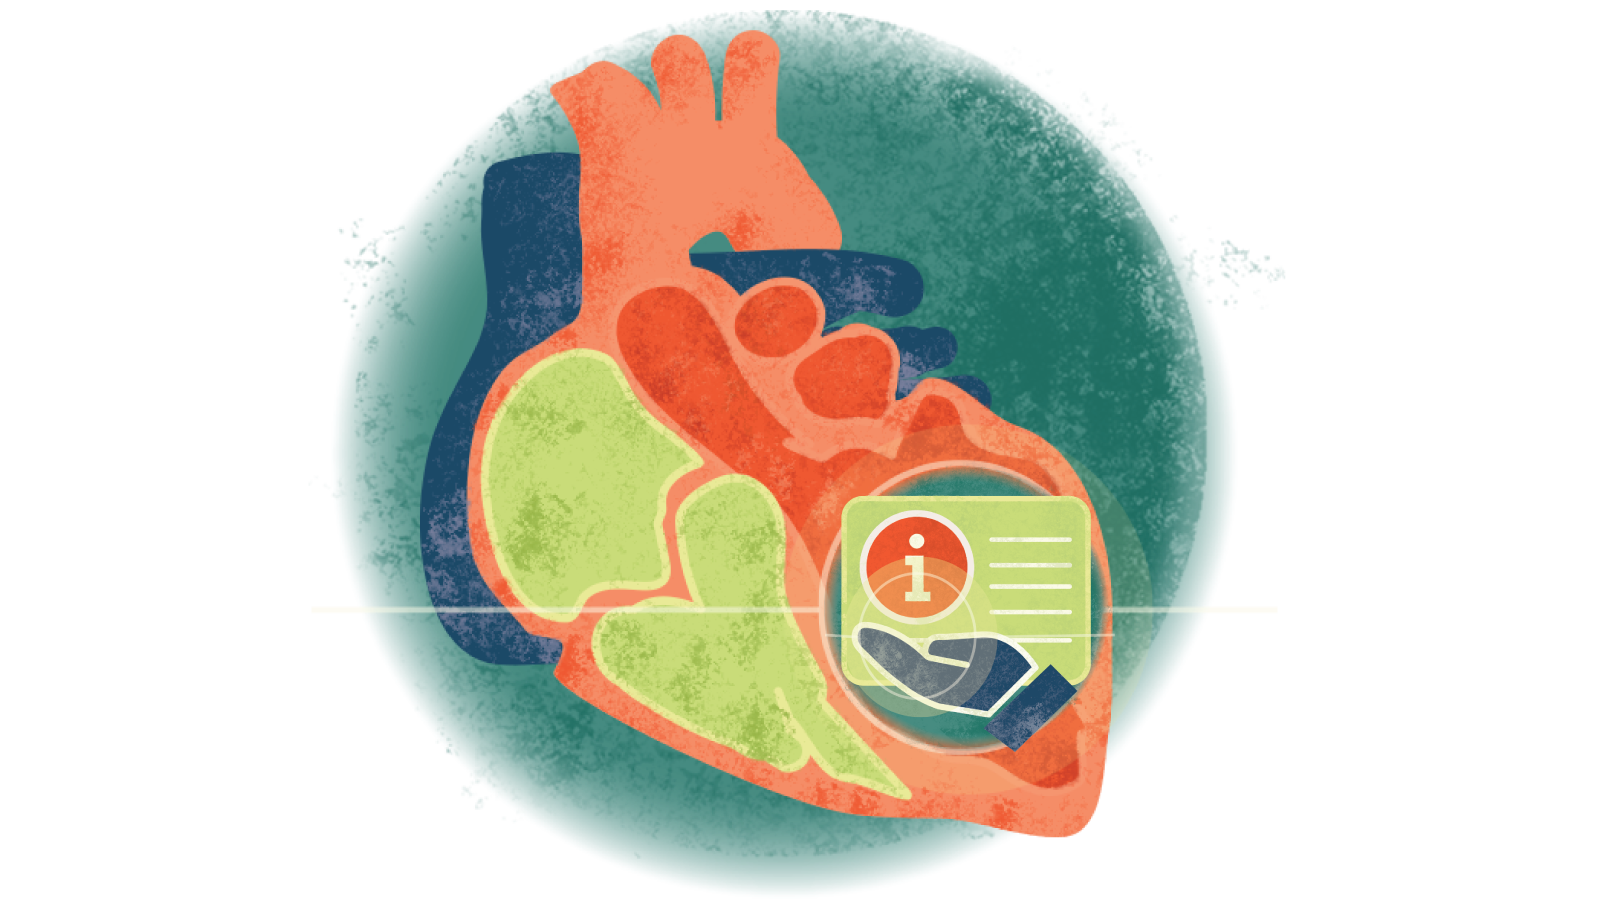 Illustration of the letter i over a hand over a heart with cardiomyopathy